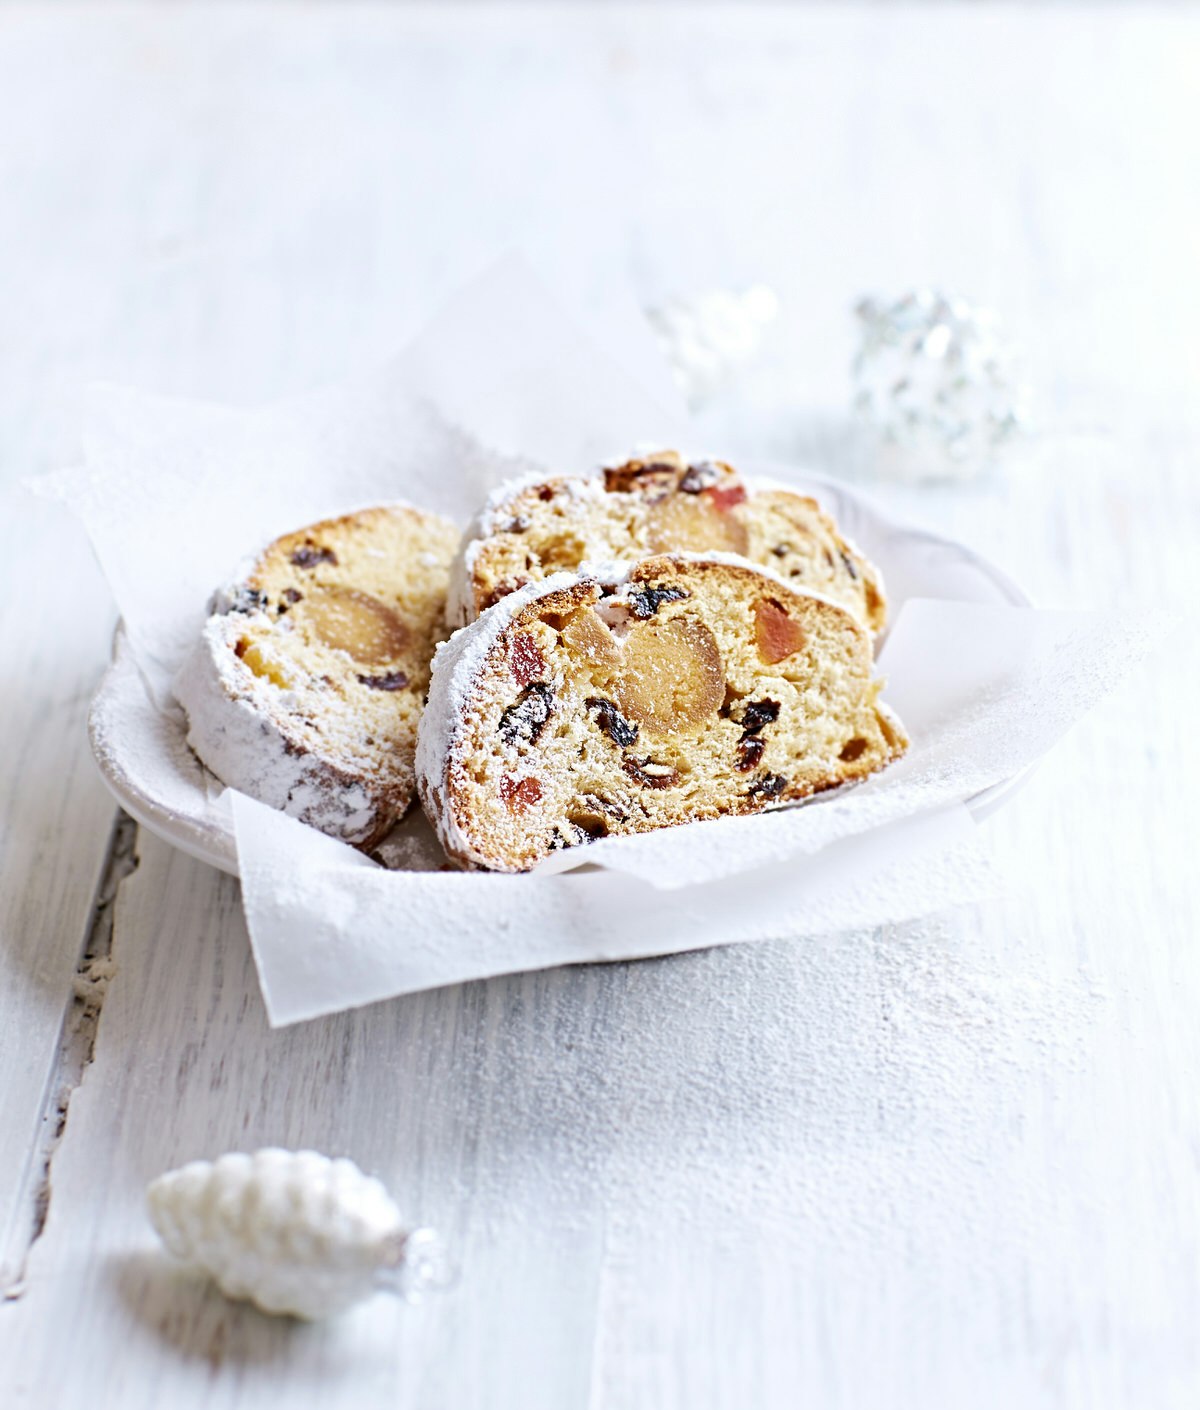 Three slices of Christmas stollen from Dresden served on a white dish and white wooden table.